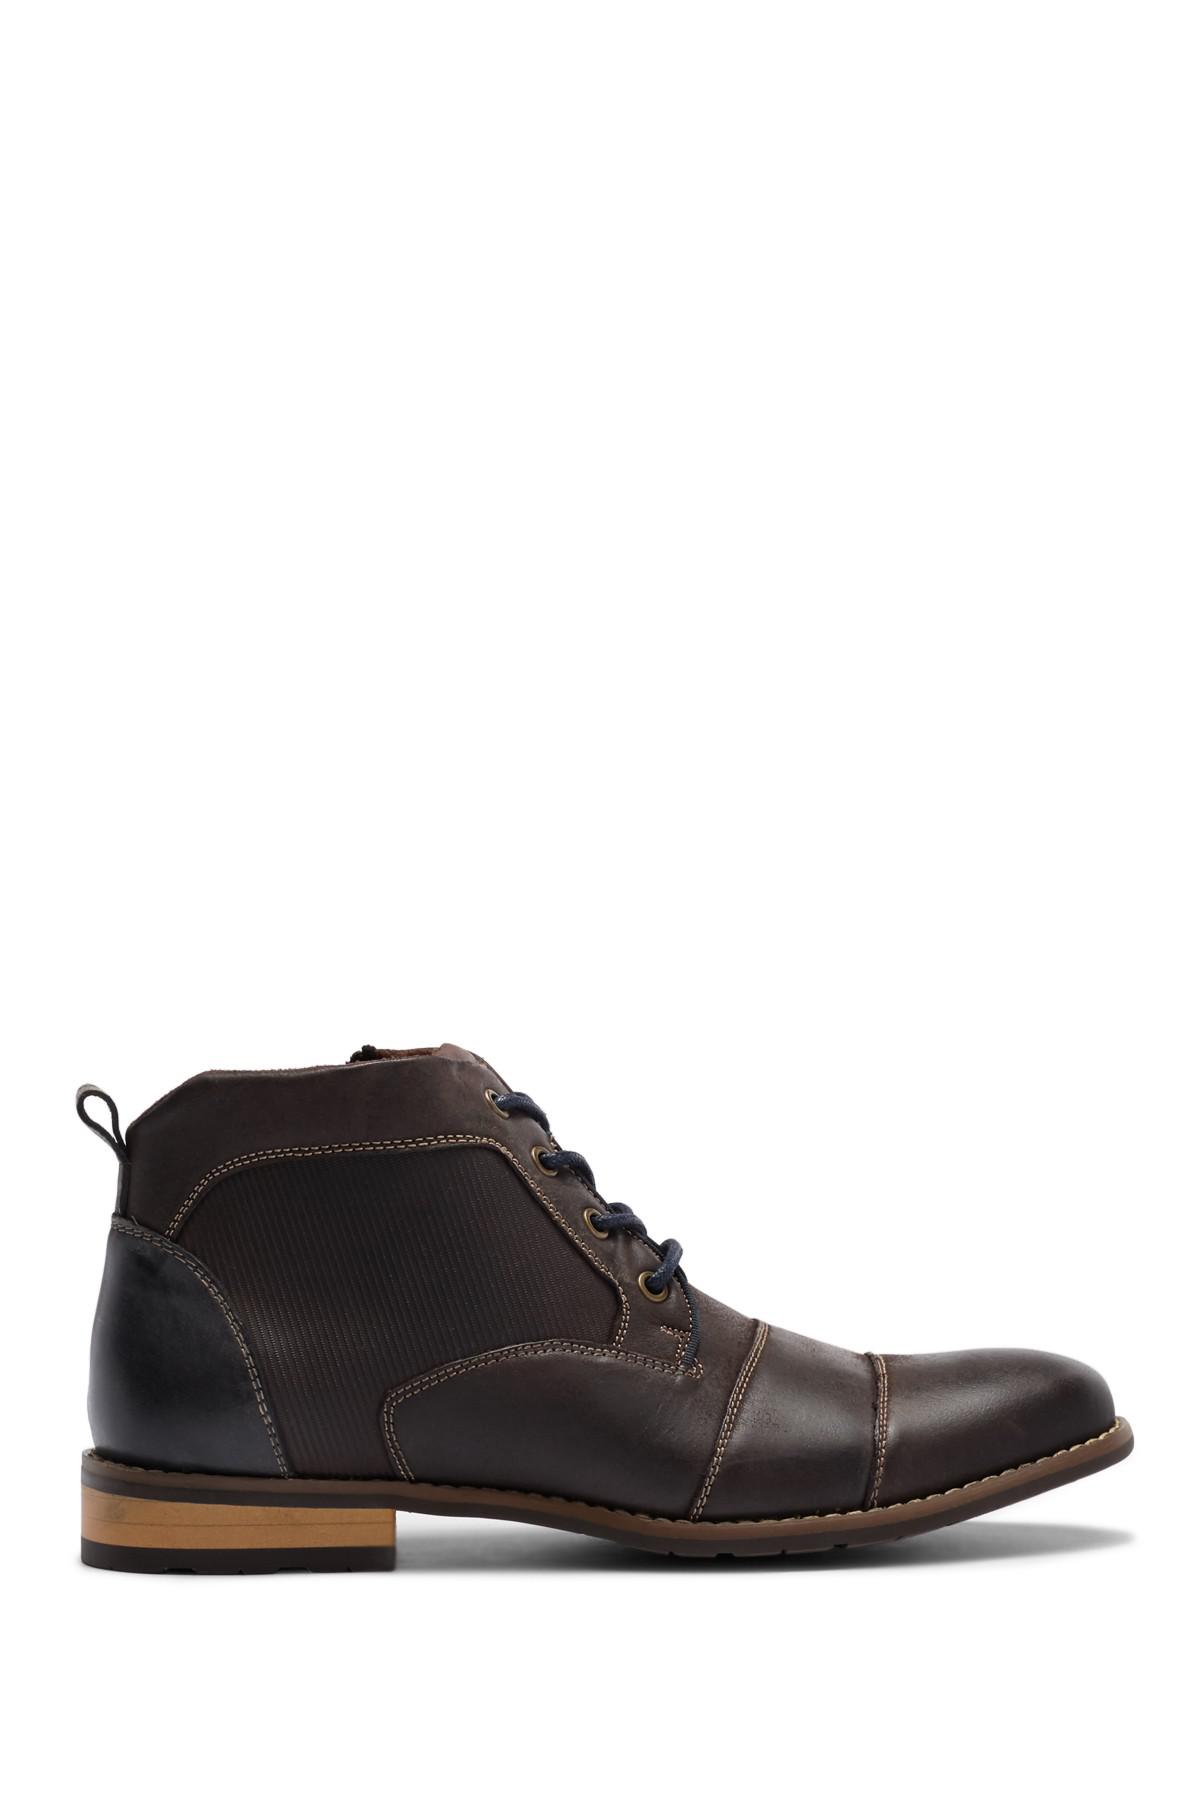 Steve Madden Elect Cap Toe Leather Boot 